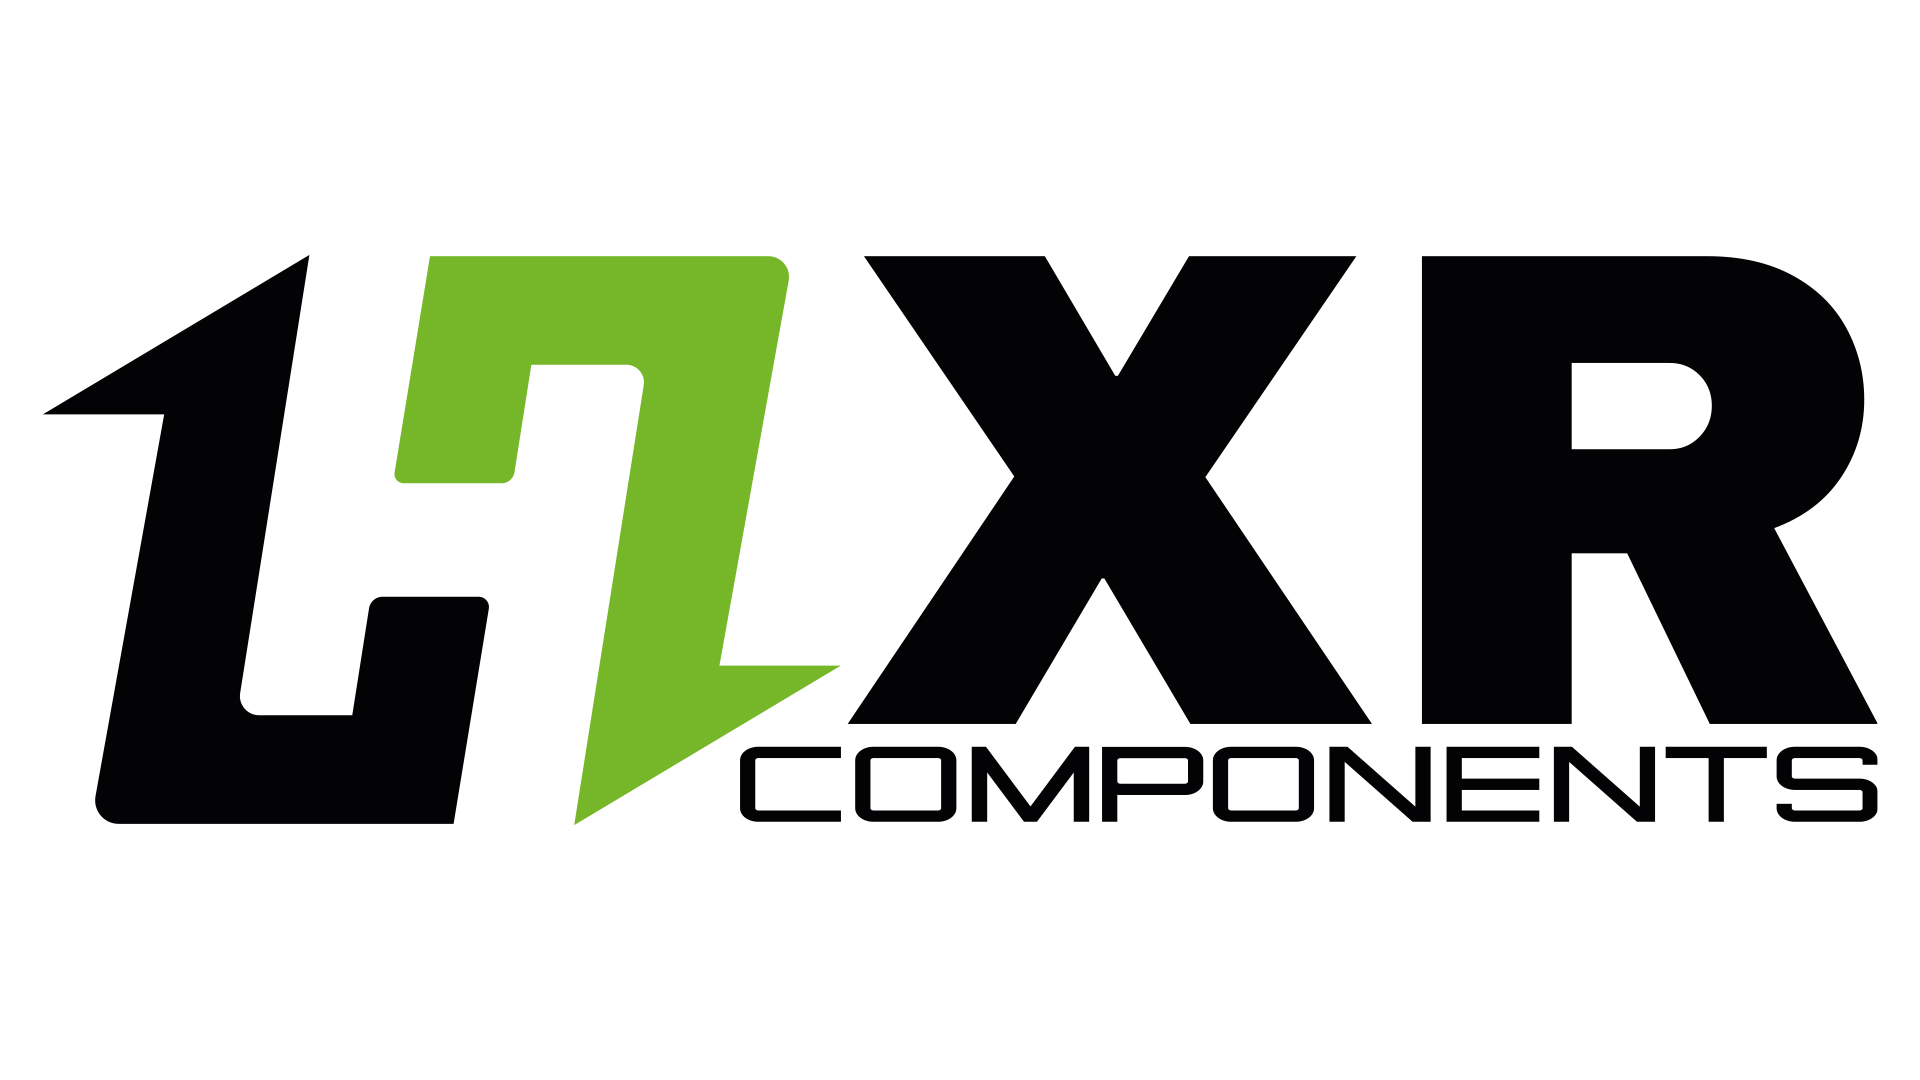 HxR Components - made by Radoxx